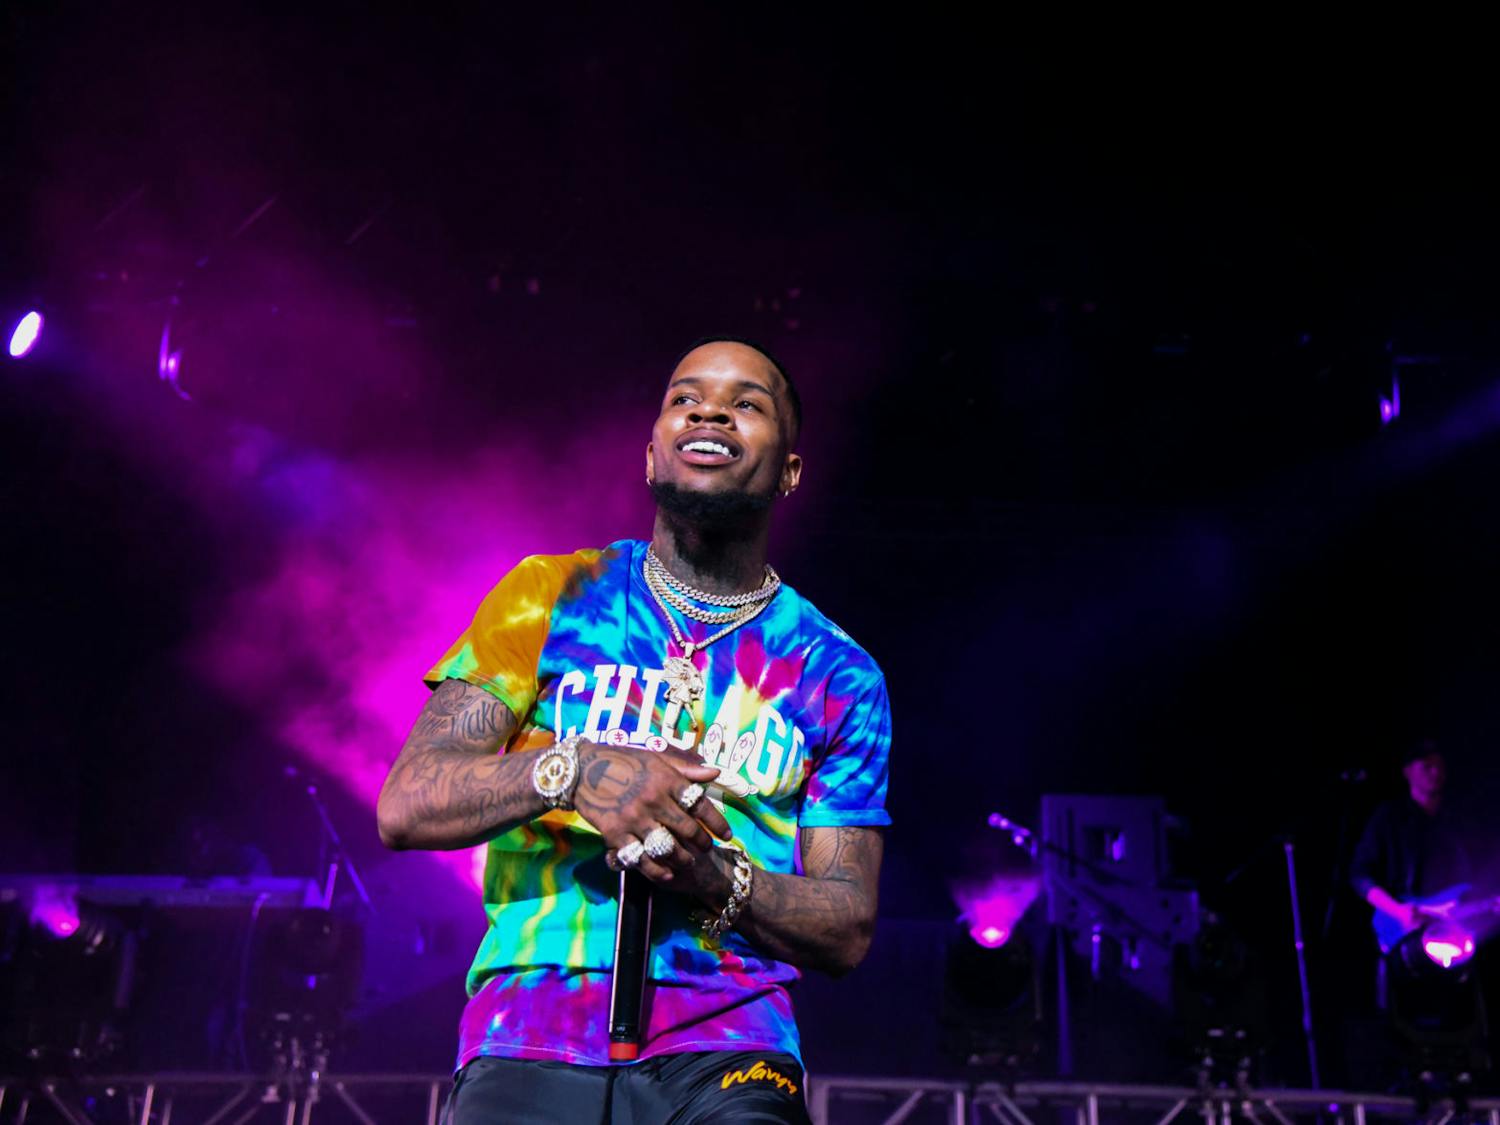 Tory Lanez sings his first song at the O’Connell Center Monday night, but stops in between songs to smile at the audience.